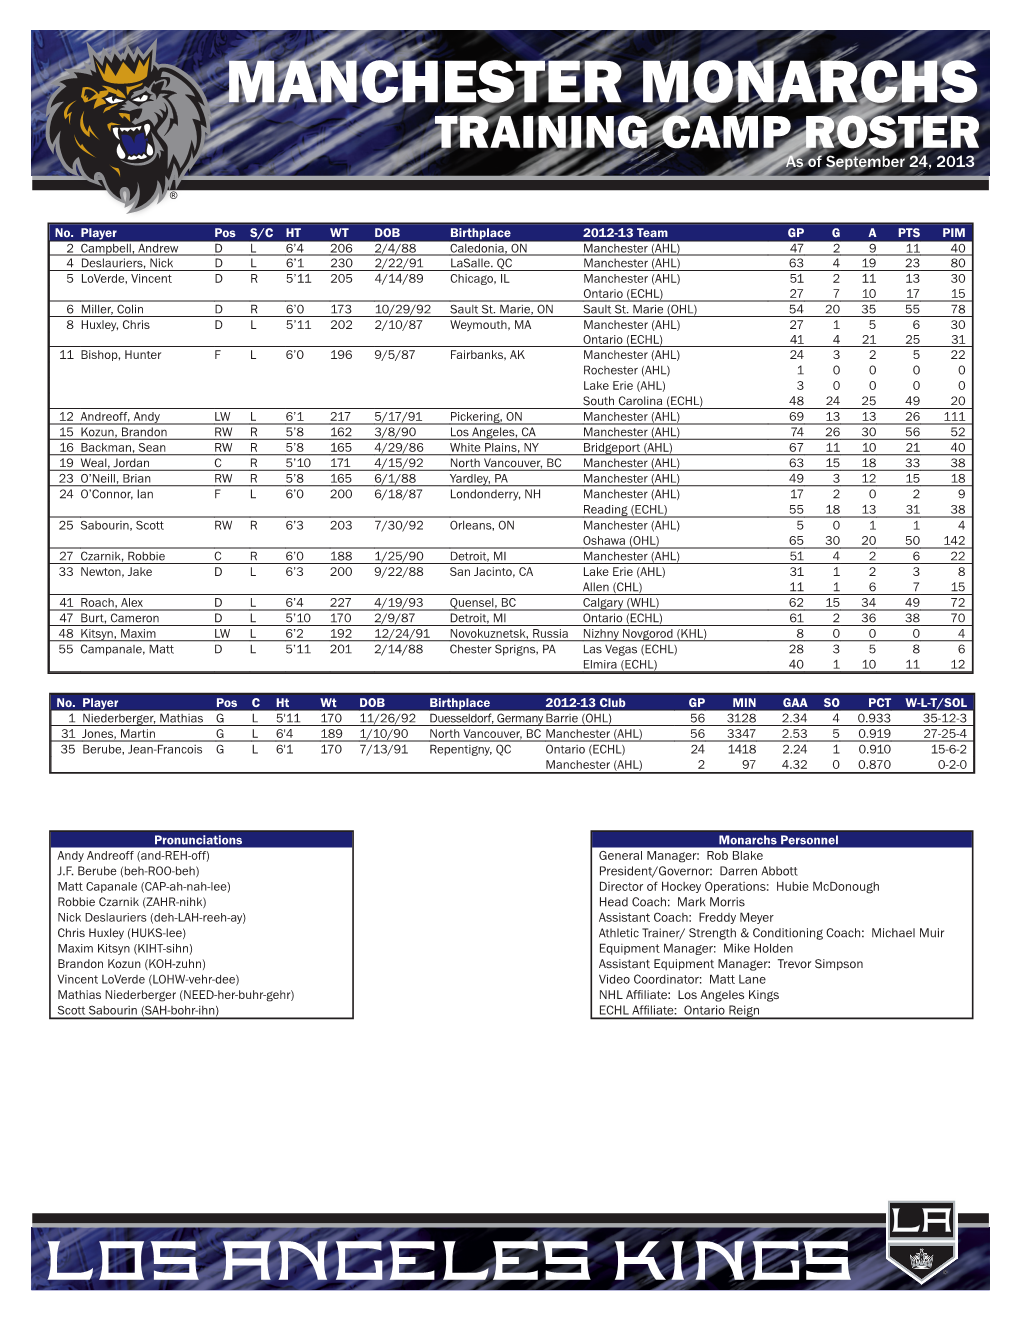 Manchester Monarchs Training Camp Roster As of September 24, 2013